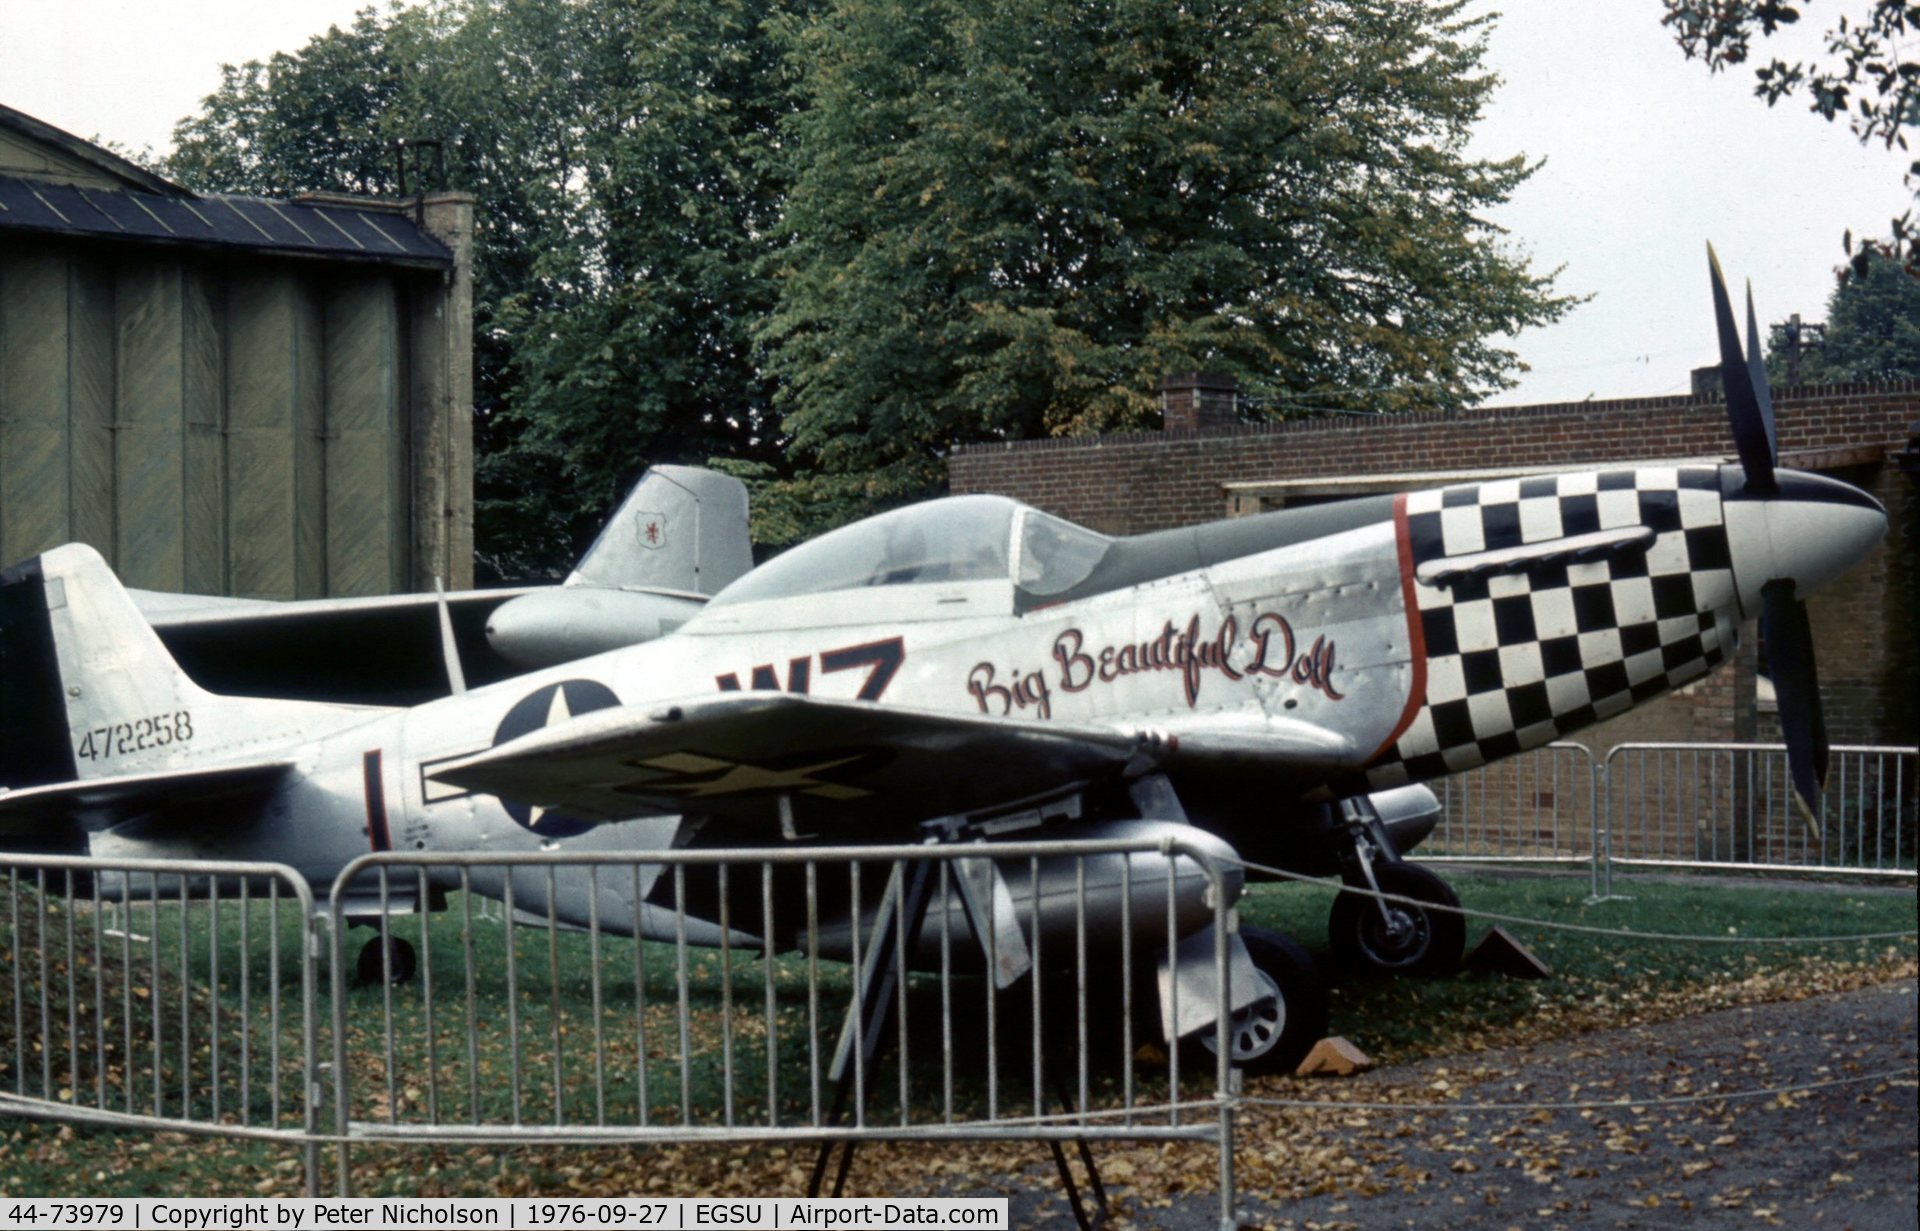 44-73979, North American P-51D Mustang C/N 122-40519, Now indoors at Lambeth, in the Summer of 1976 Big Beautiful Doll 44-72258 was on display at the Imperial War Museum at Duxford.